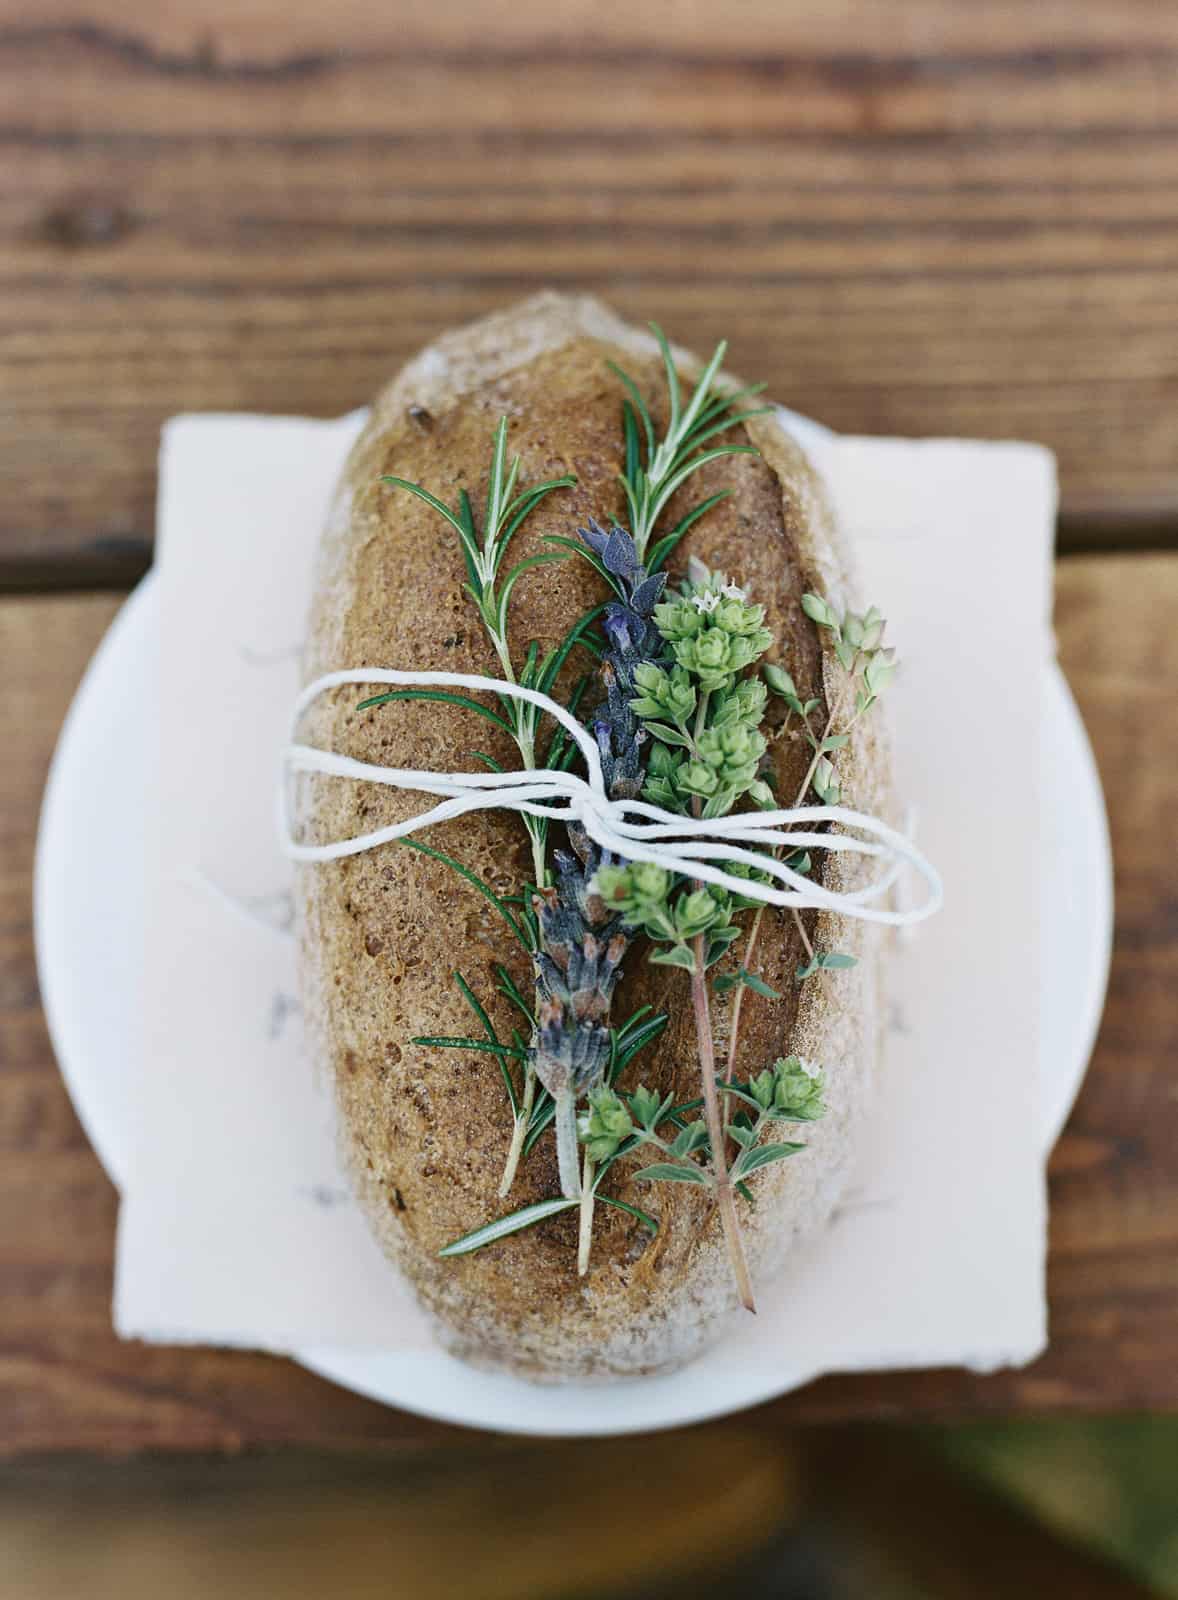 rustic bread loaf with herbs tied on top